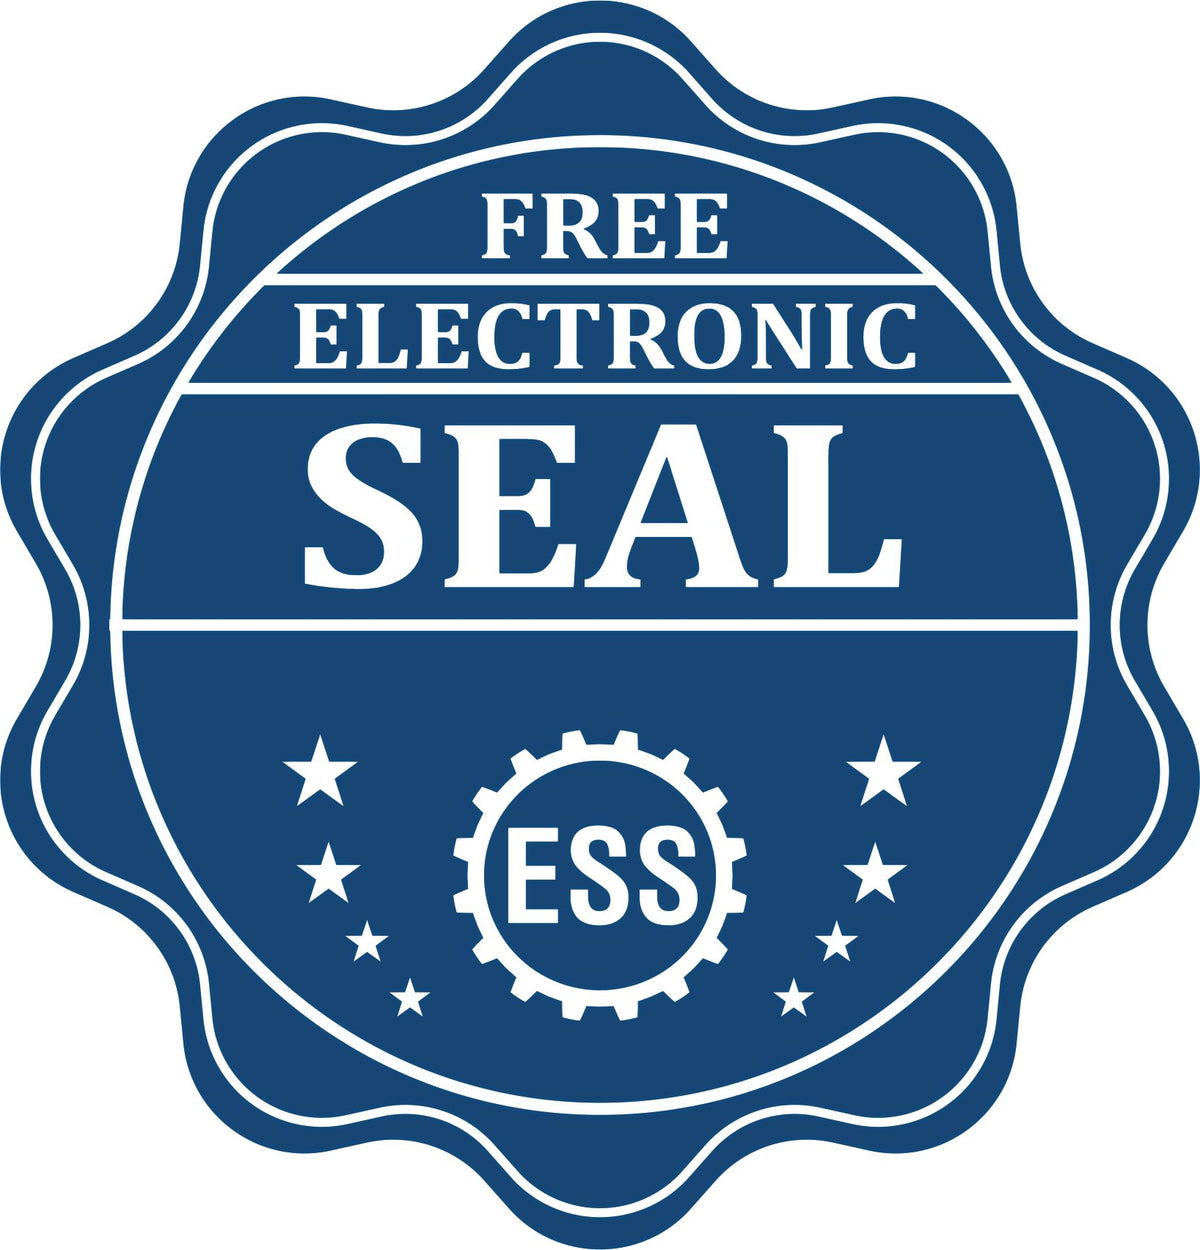 A badge showing a free electronic seal for the Heavy Duty Cast Iron Massachusetts Engineer Seal Embosser with stars and the ESS gear on the emblem.